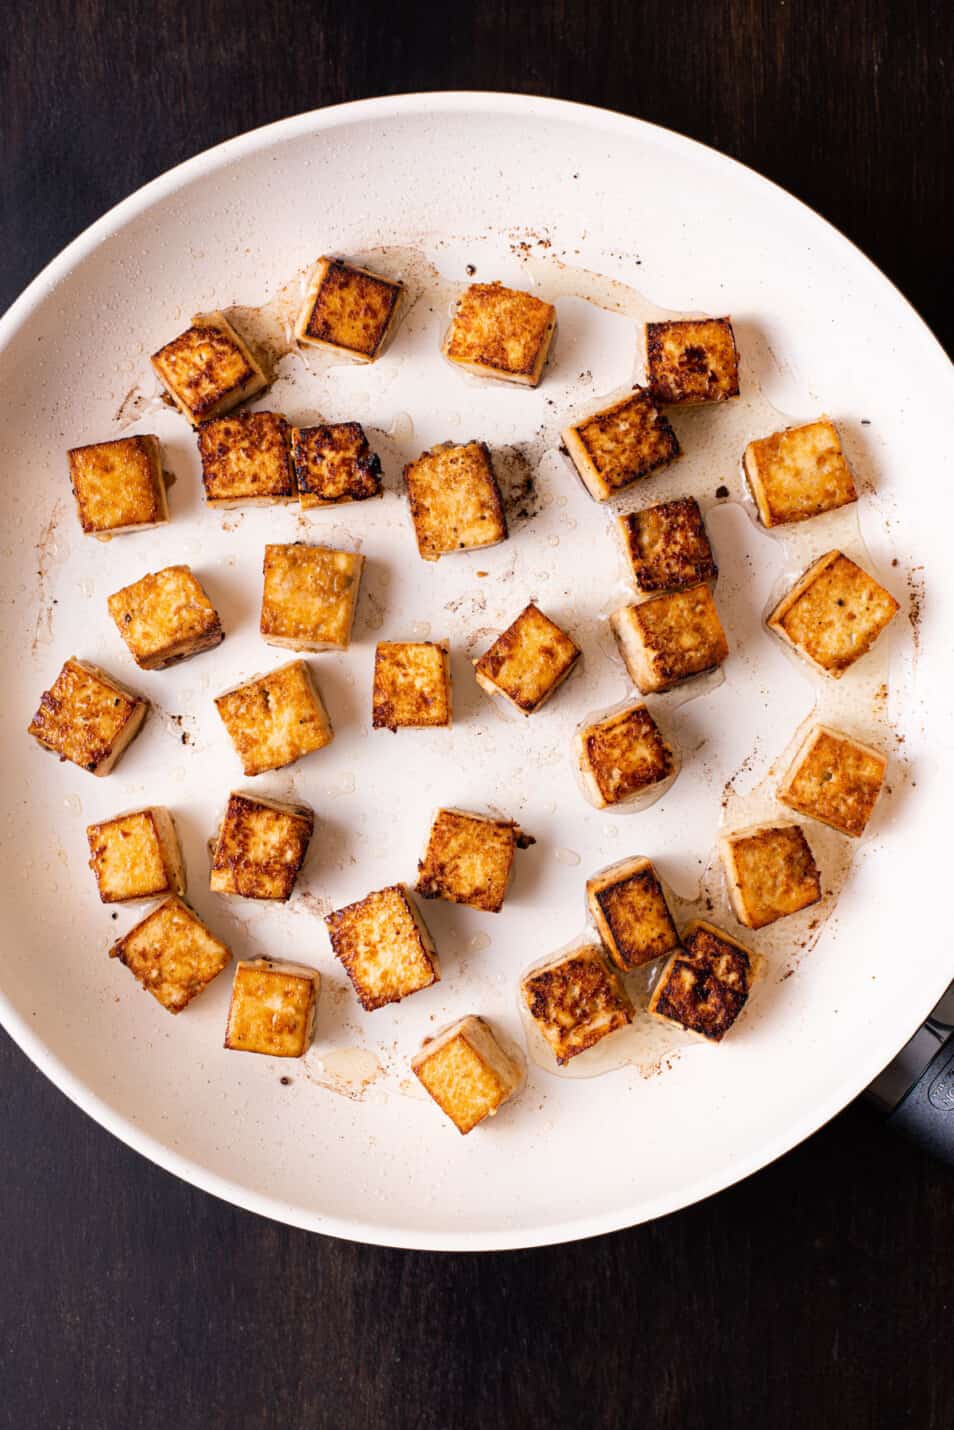 Cubes of pan-fried tofu in a non-stick skillet.